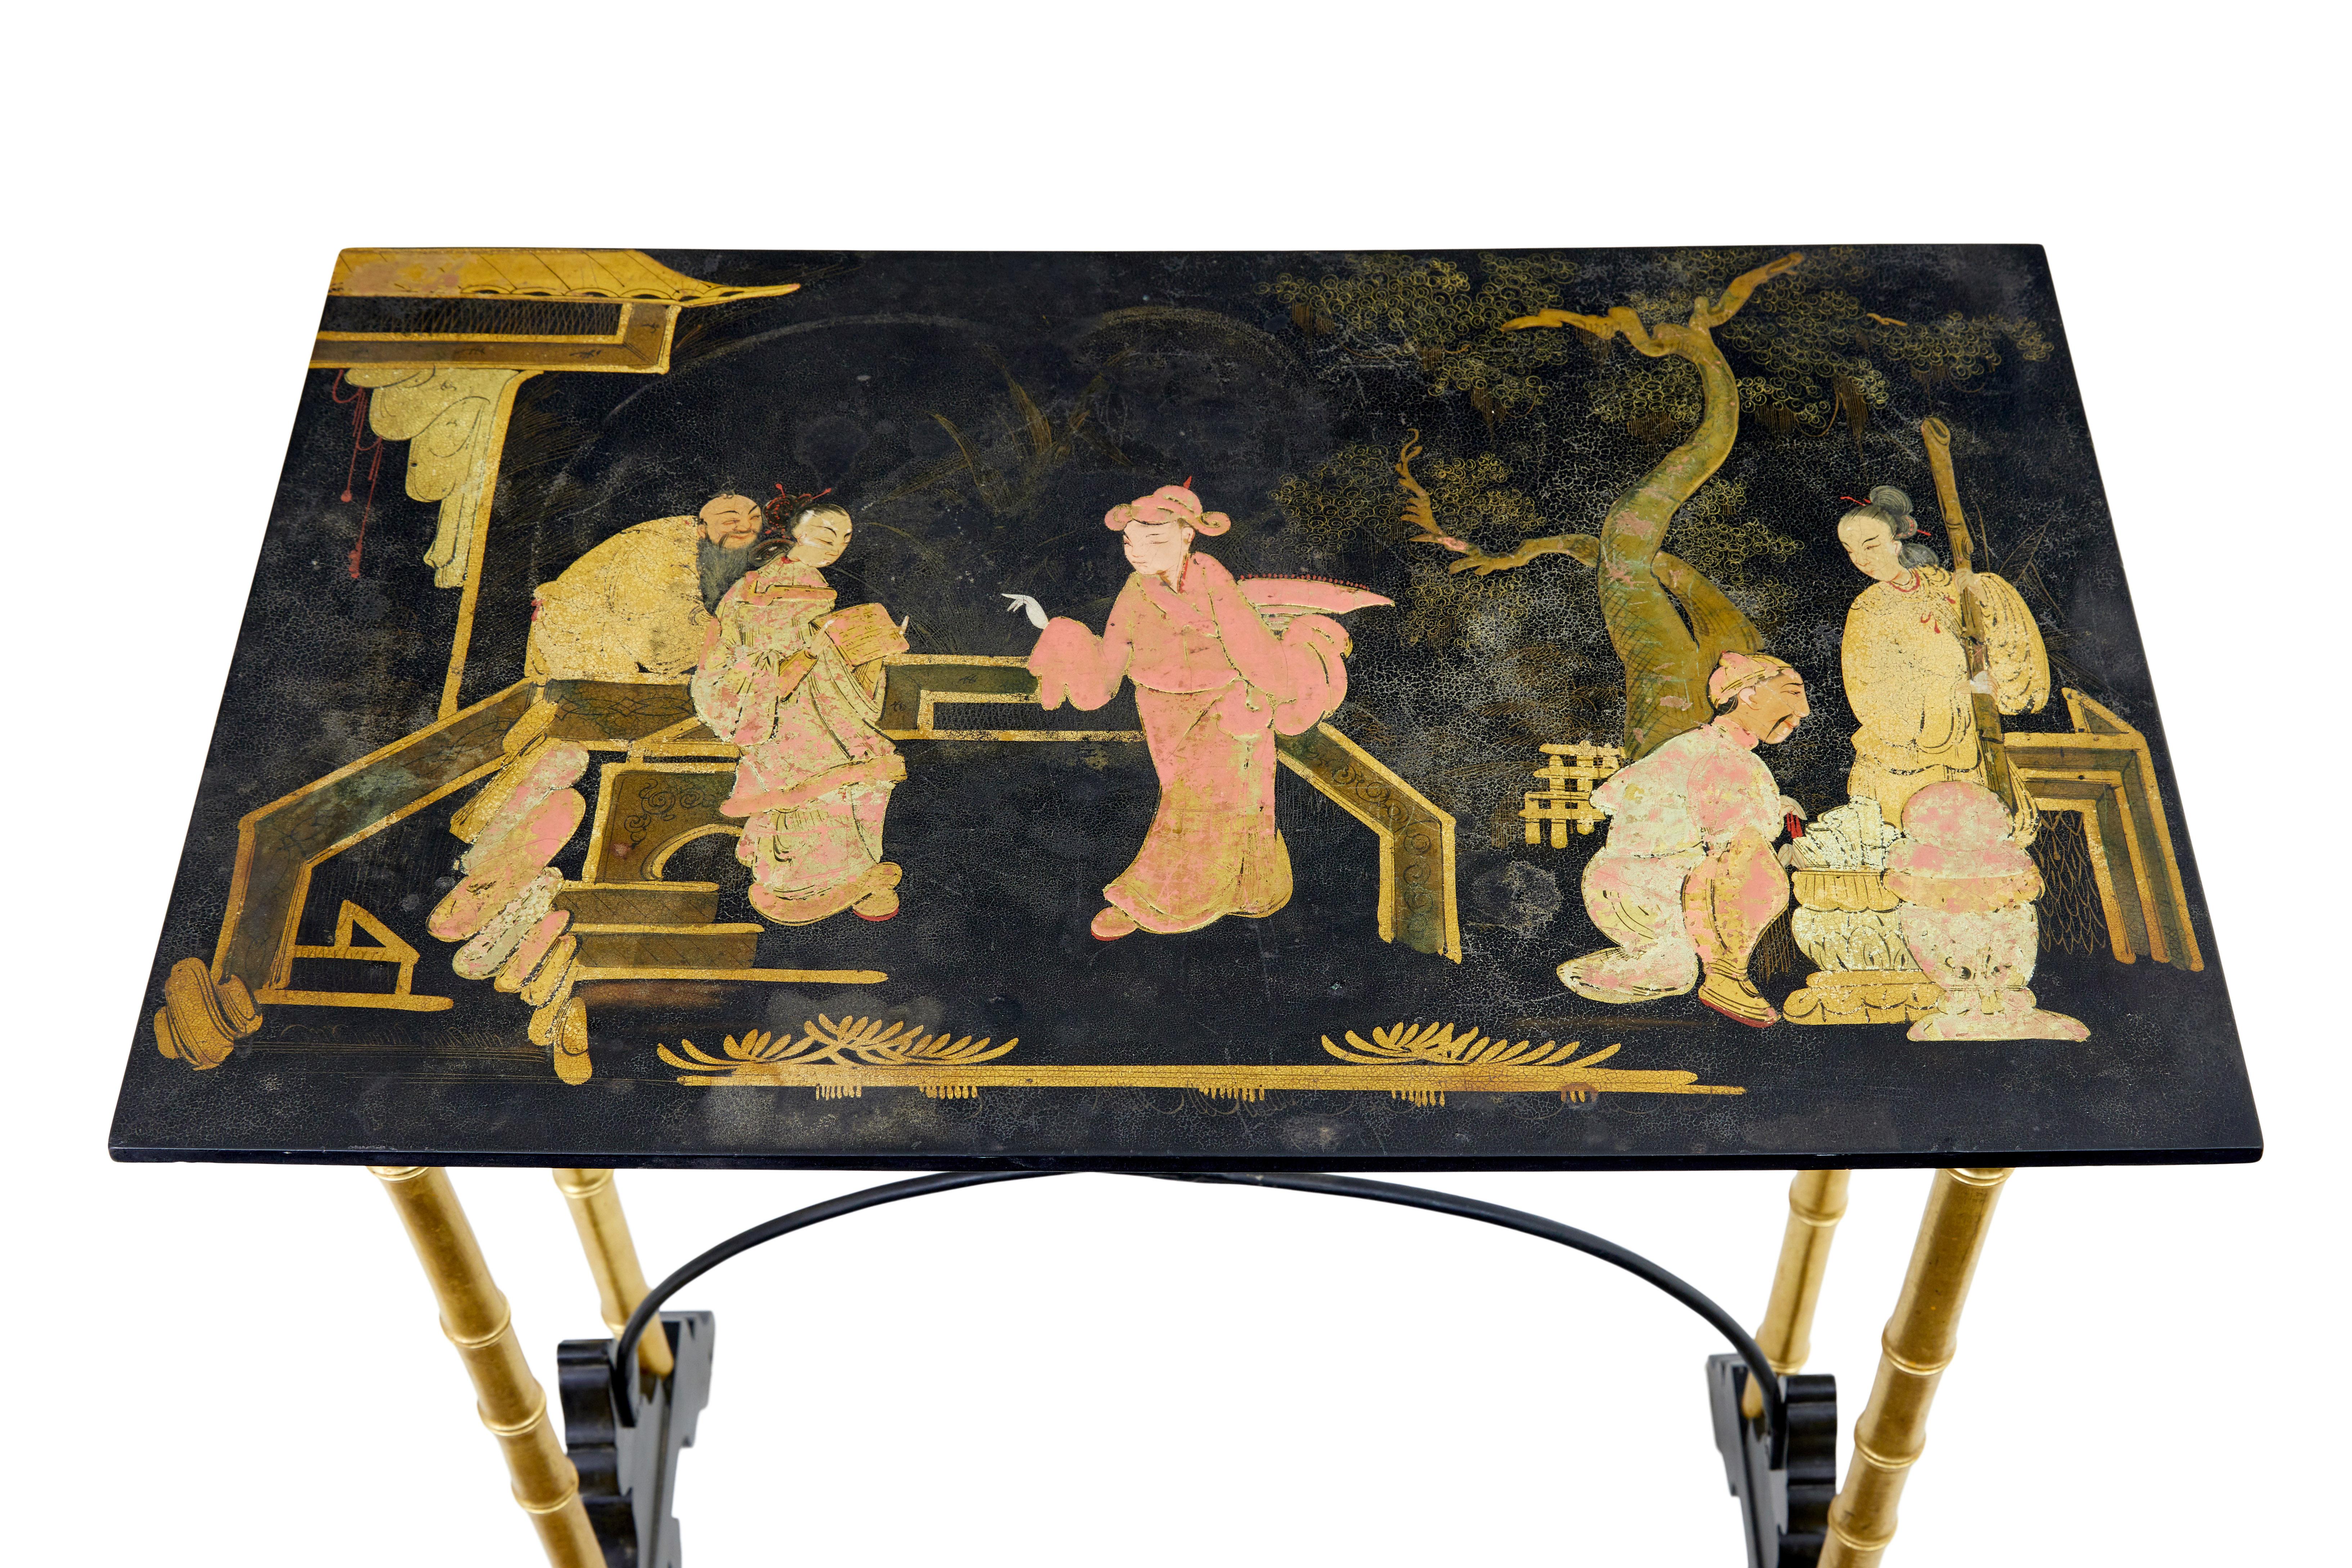 Late 19th century Japanese black lacquer and gilt occasional table, circa 1890.

Good quality sewing table. Gilt and painted traditional scene to the top. Single drawer to the front. Hand painted florals to the sides and feet, gilt faux bamboo